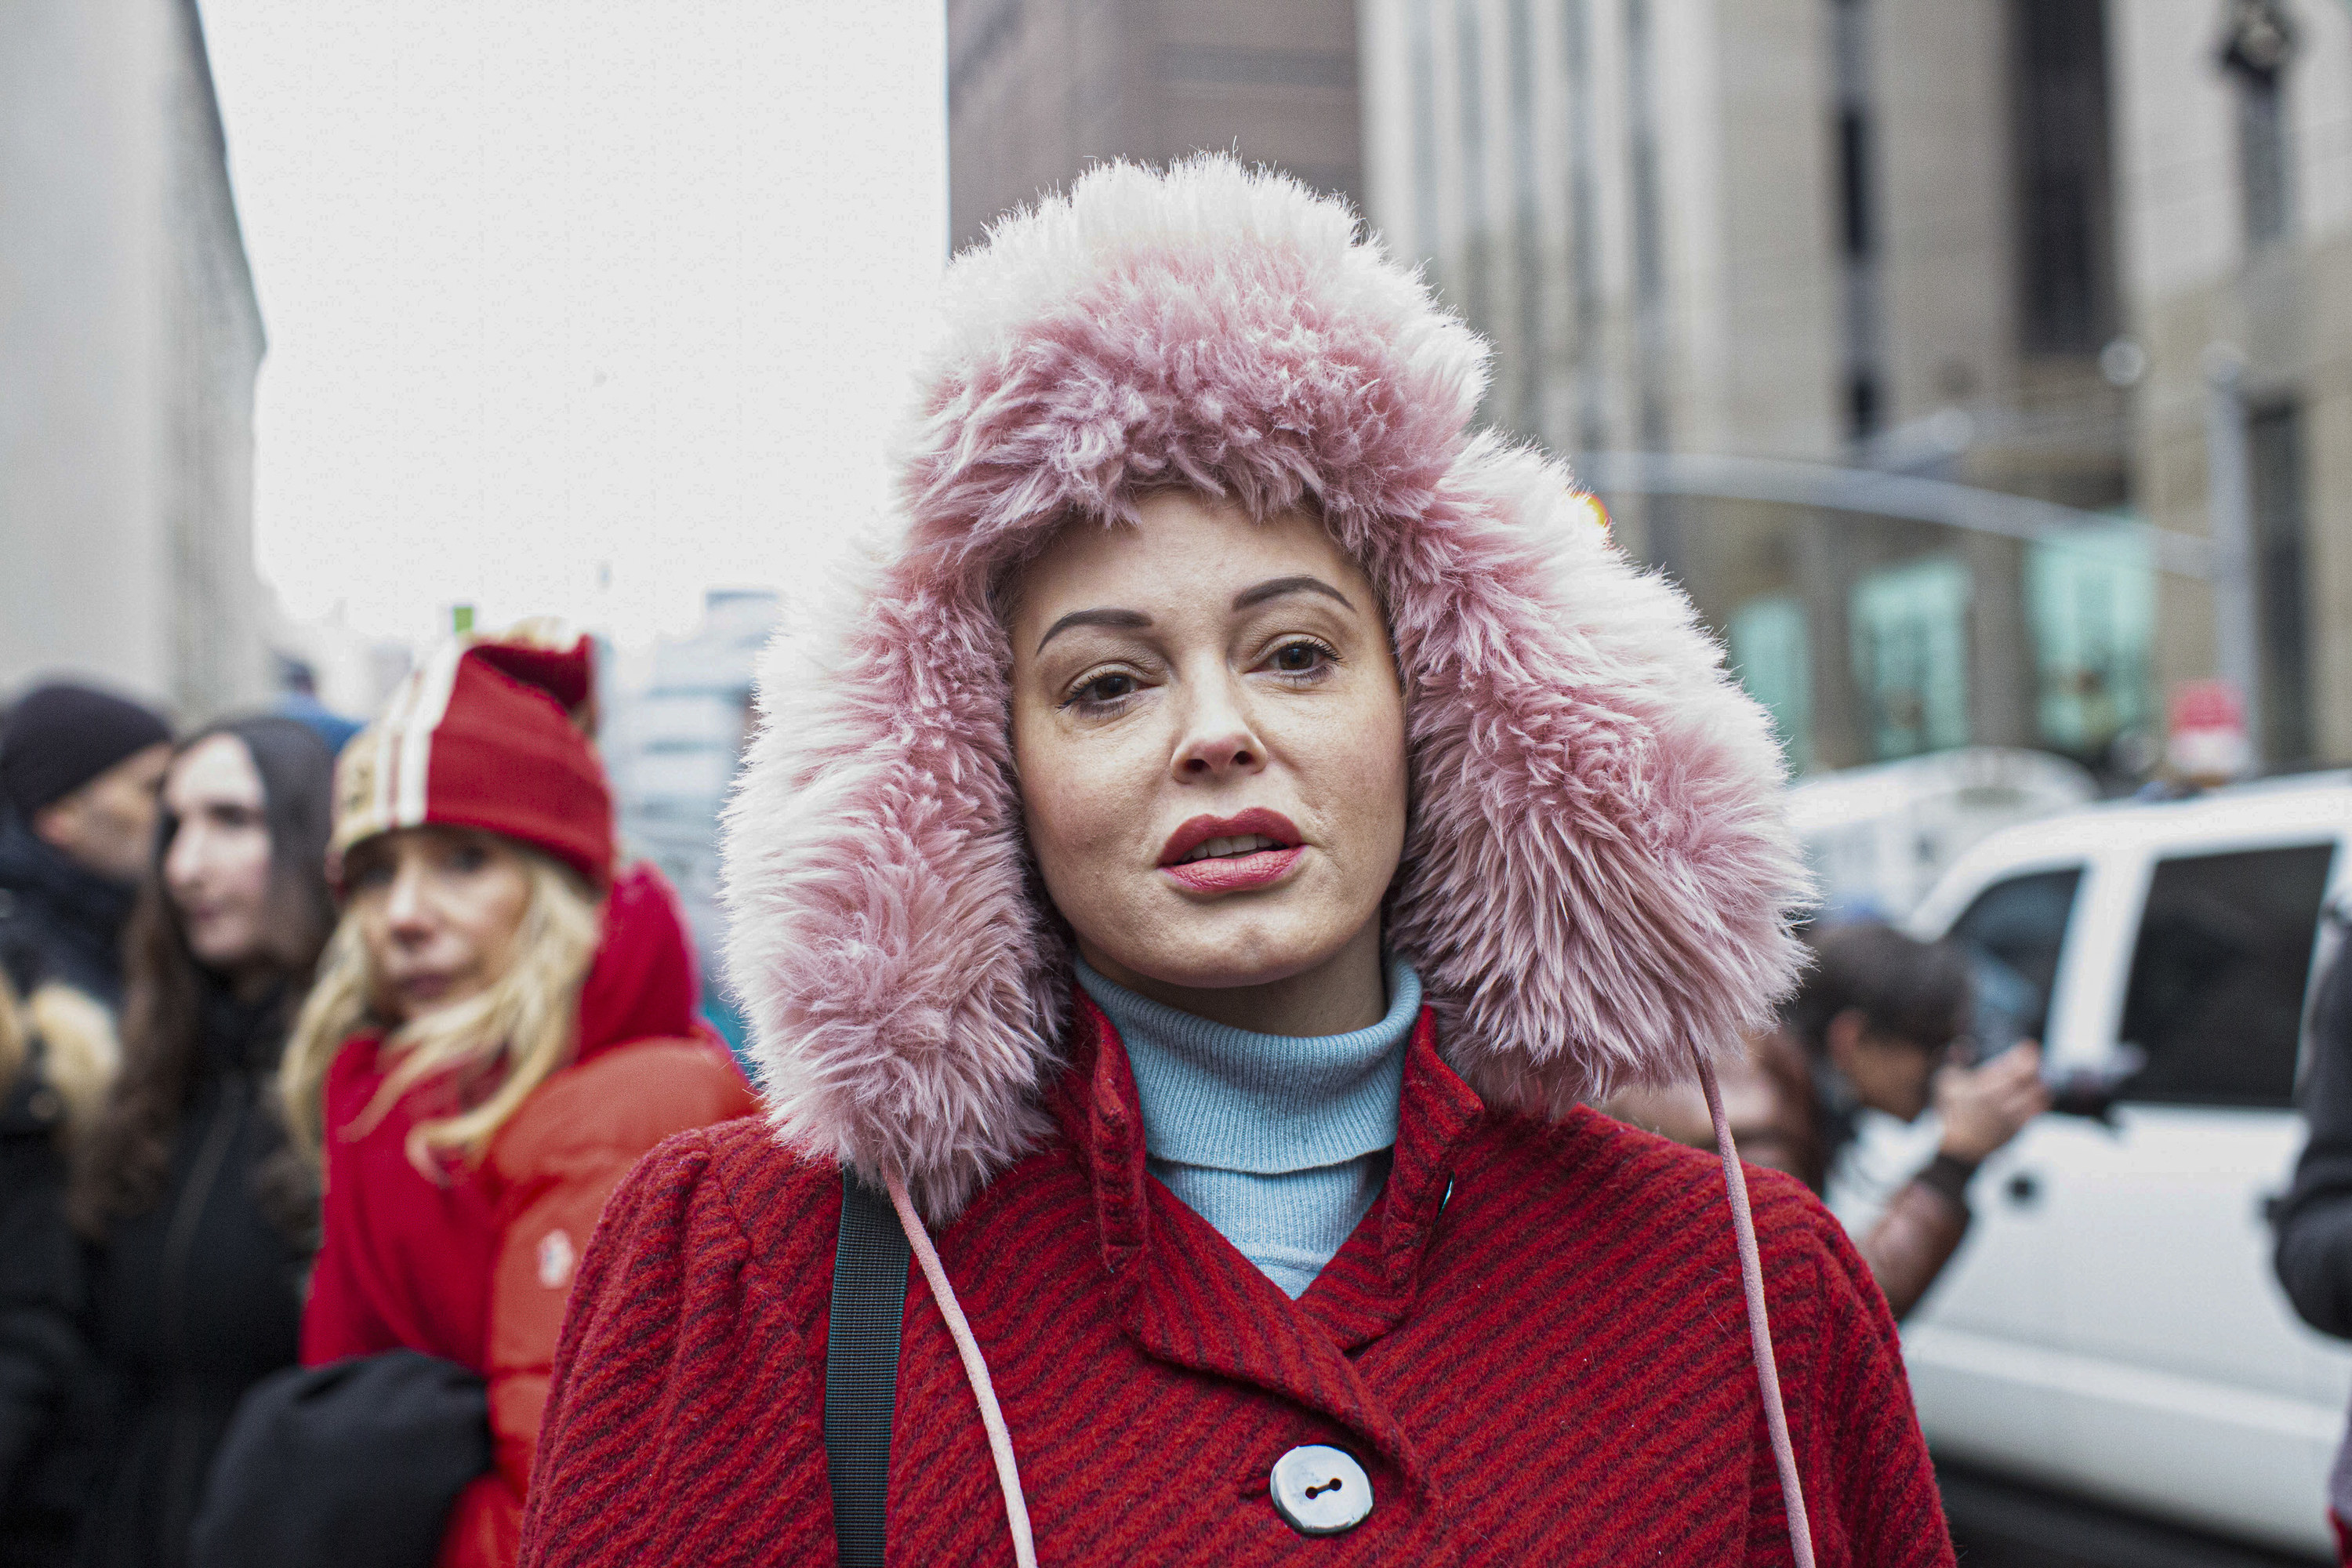 Rose McGowan walks in a crowd in a red coat and big pink fluffy hat